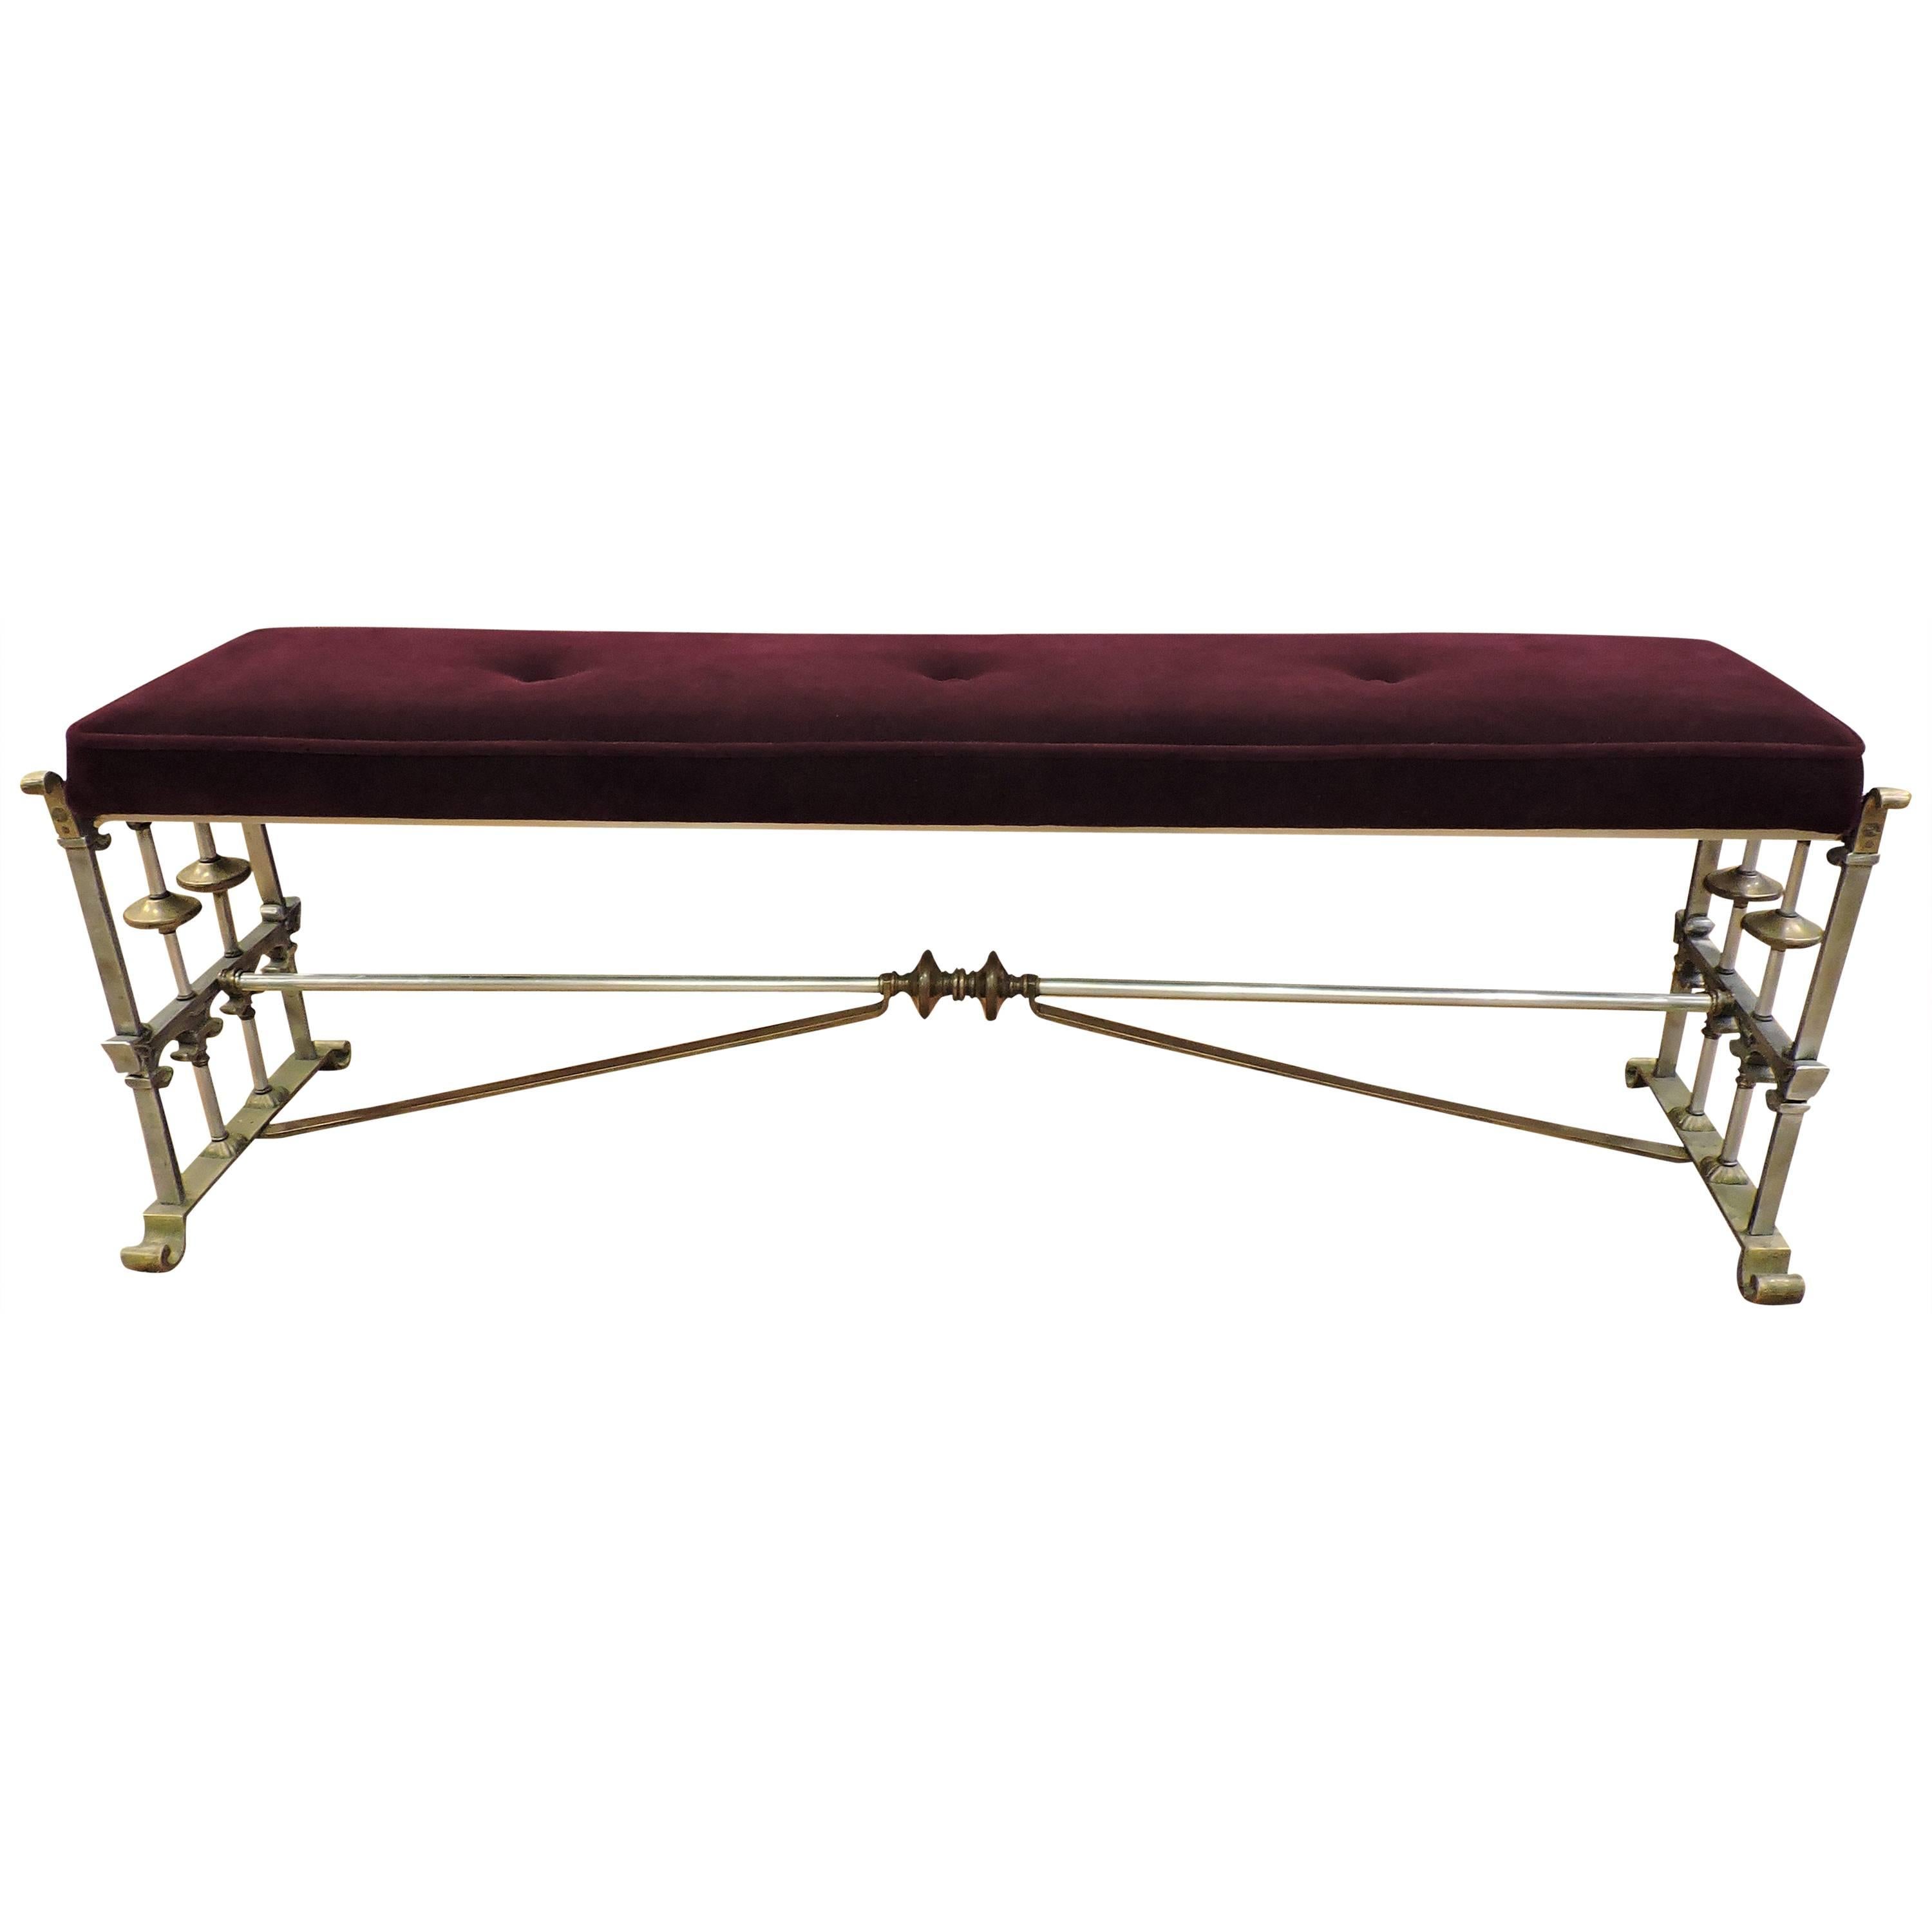 Mid-Century Modern Gothic Style Aluminium and Brass Upholstered Bench